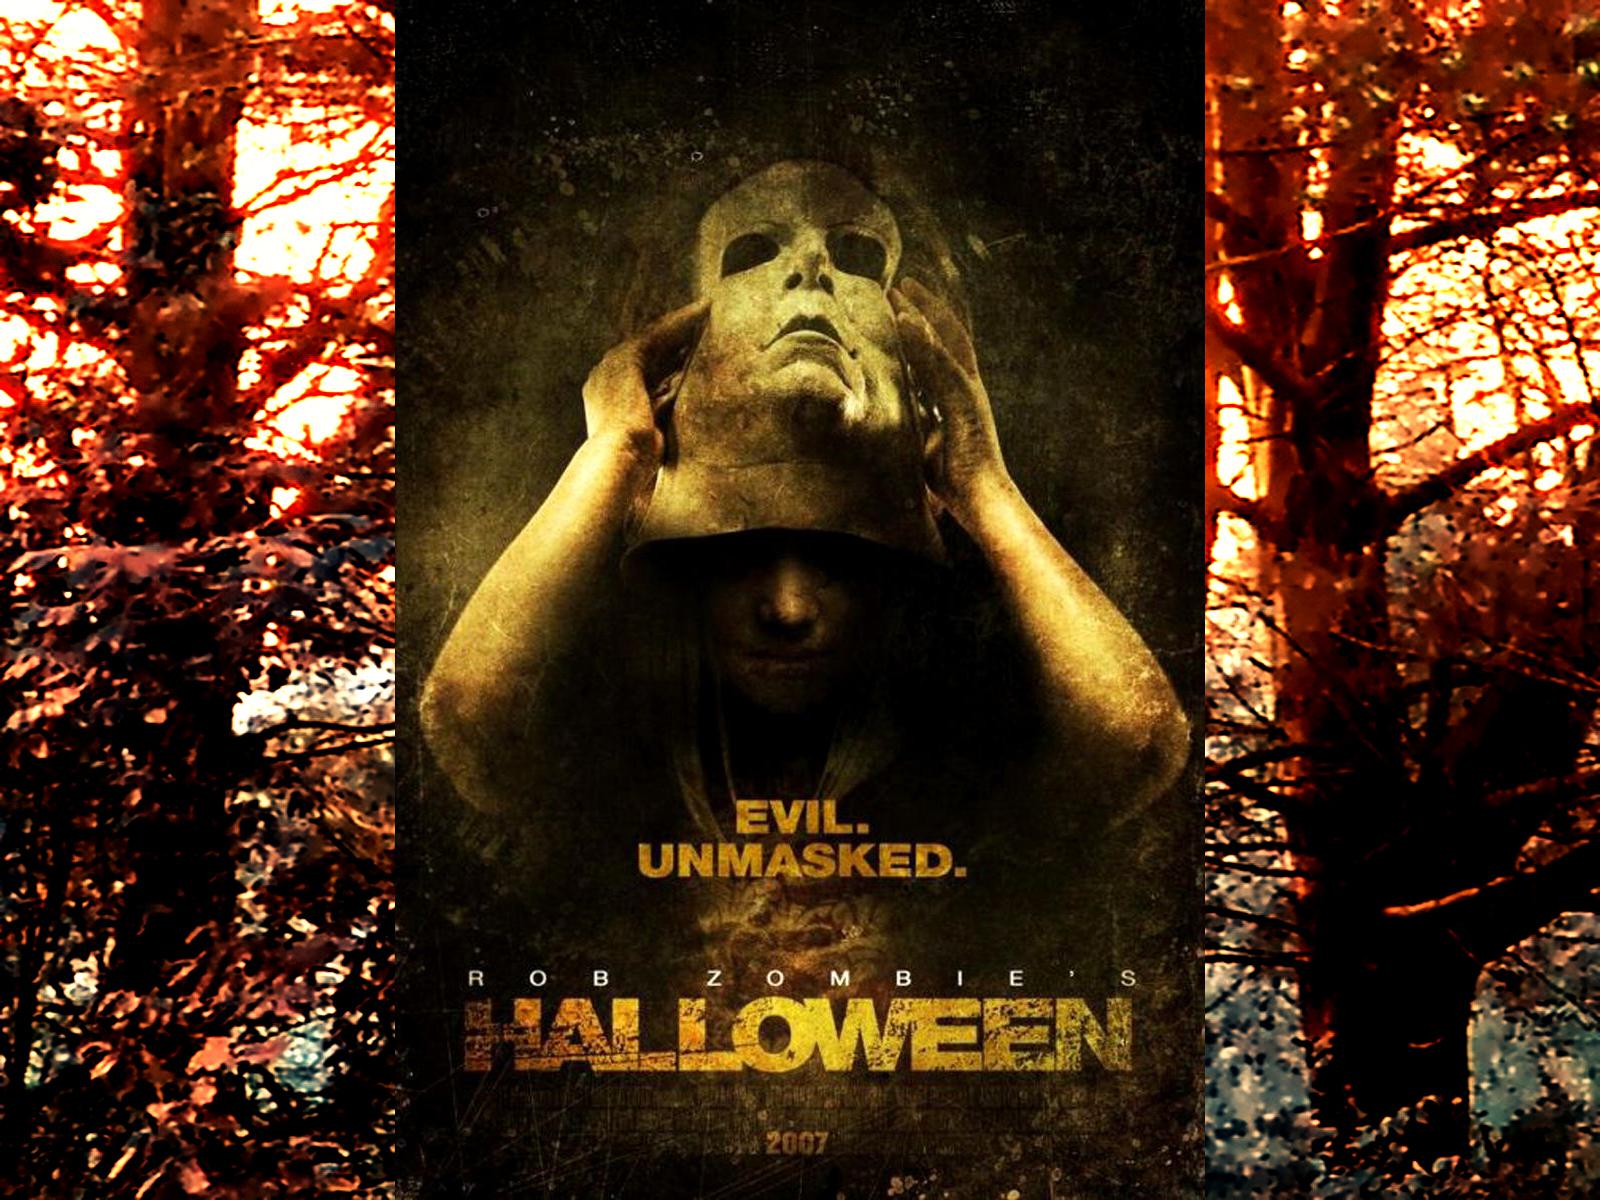 Rob zombie halloween 1 poster02 - (#136350) - High Quality and ...